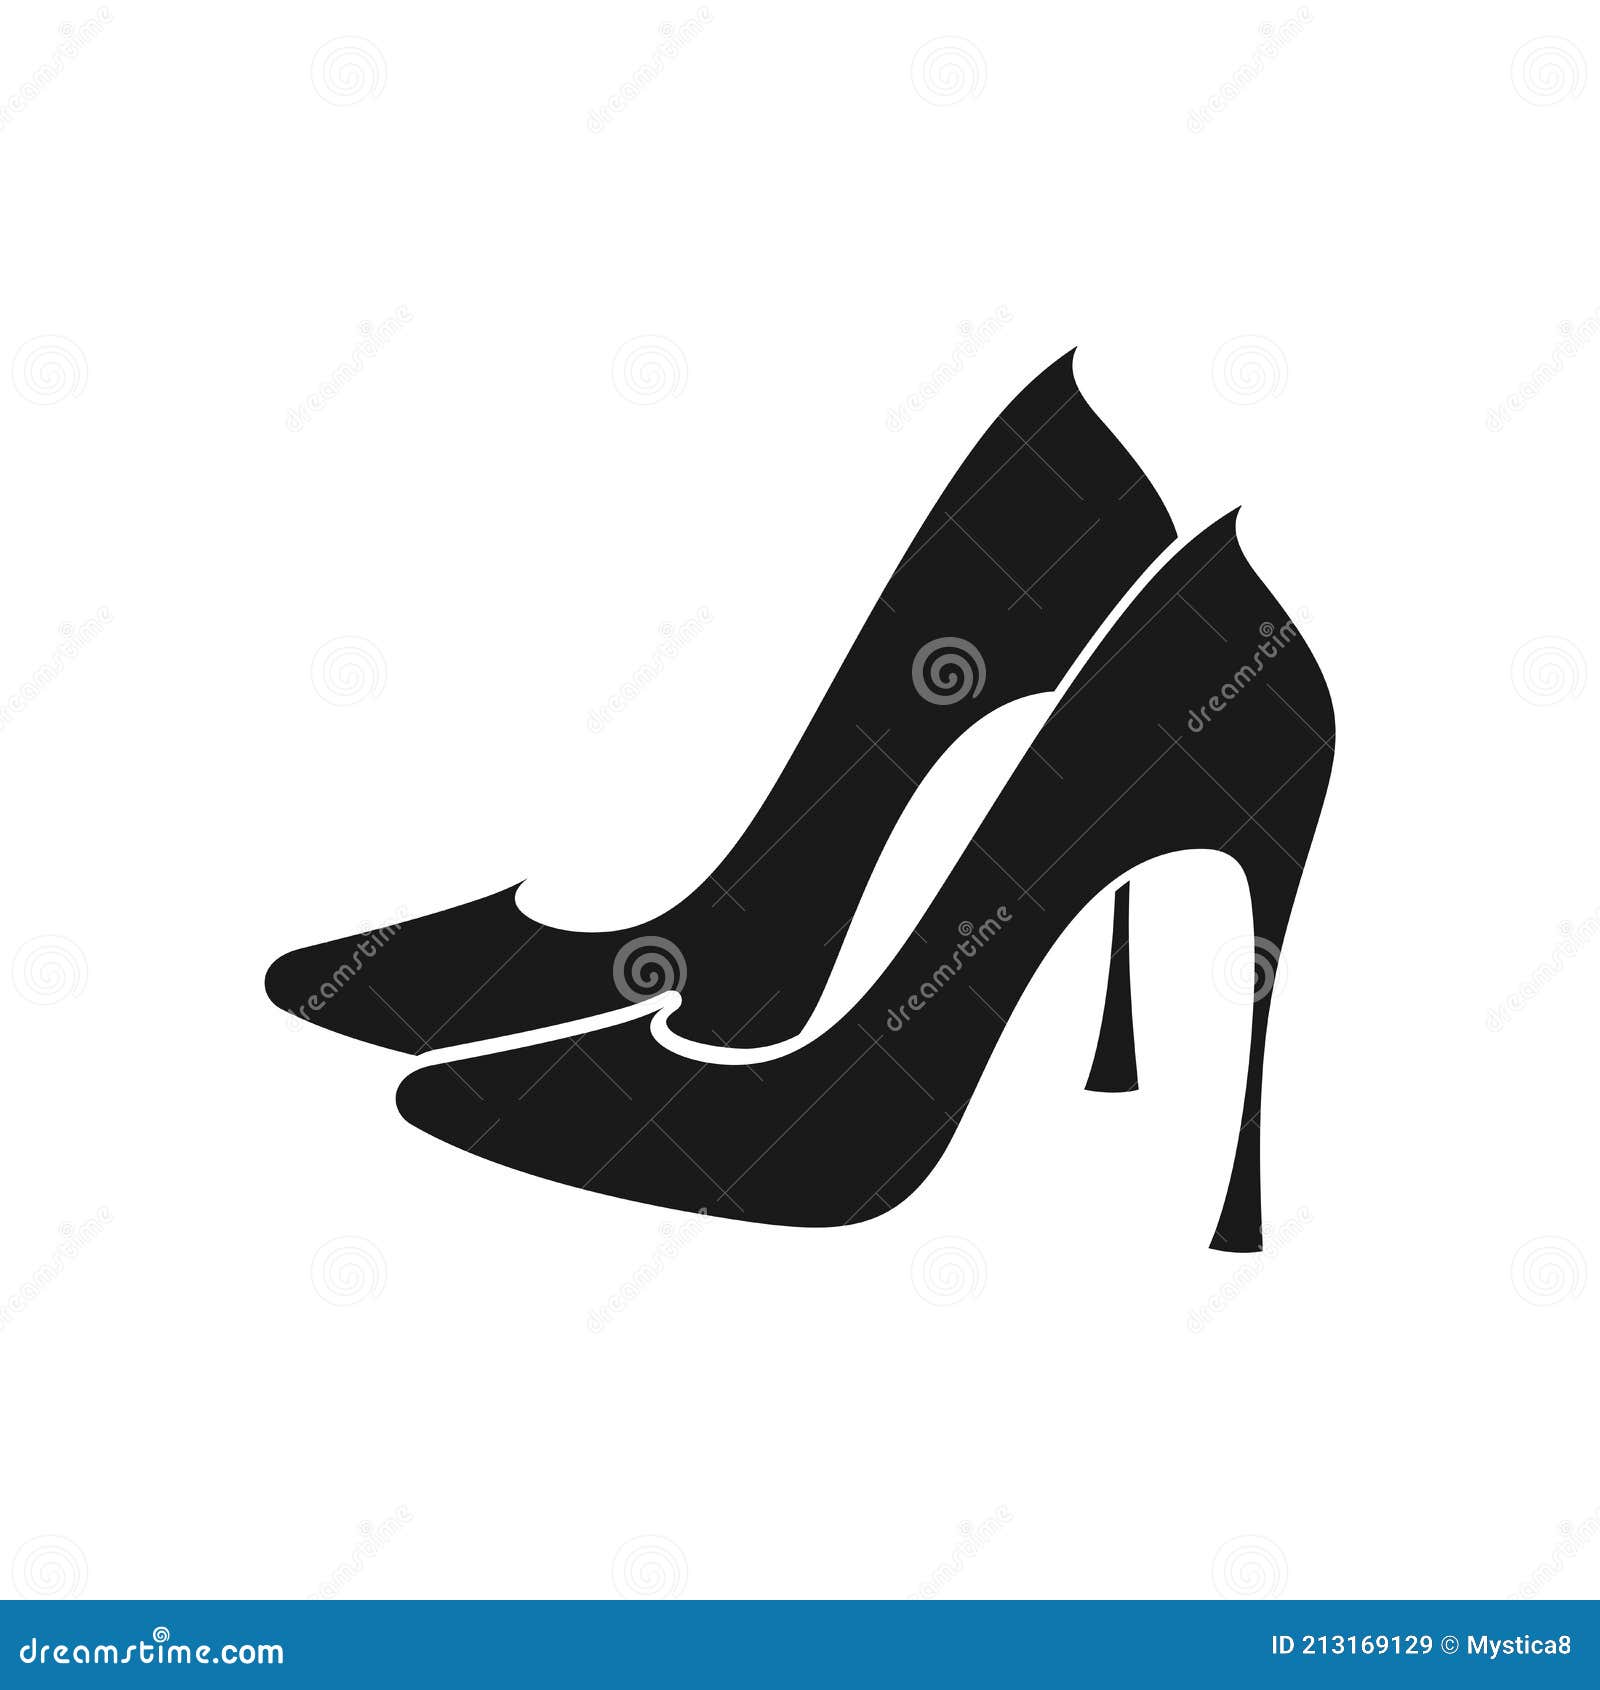 Women and High Heels - Stiletto High Heels by RoSa Shoes